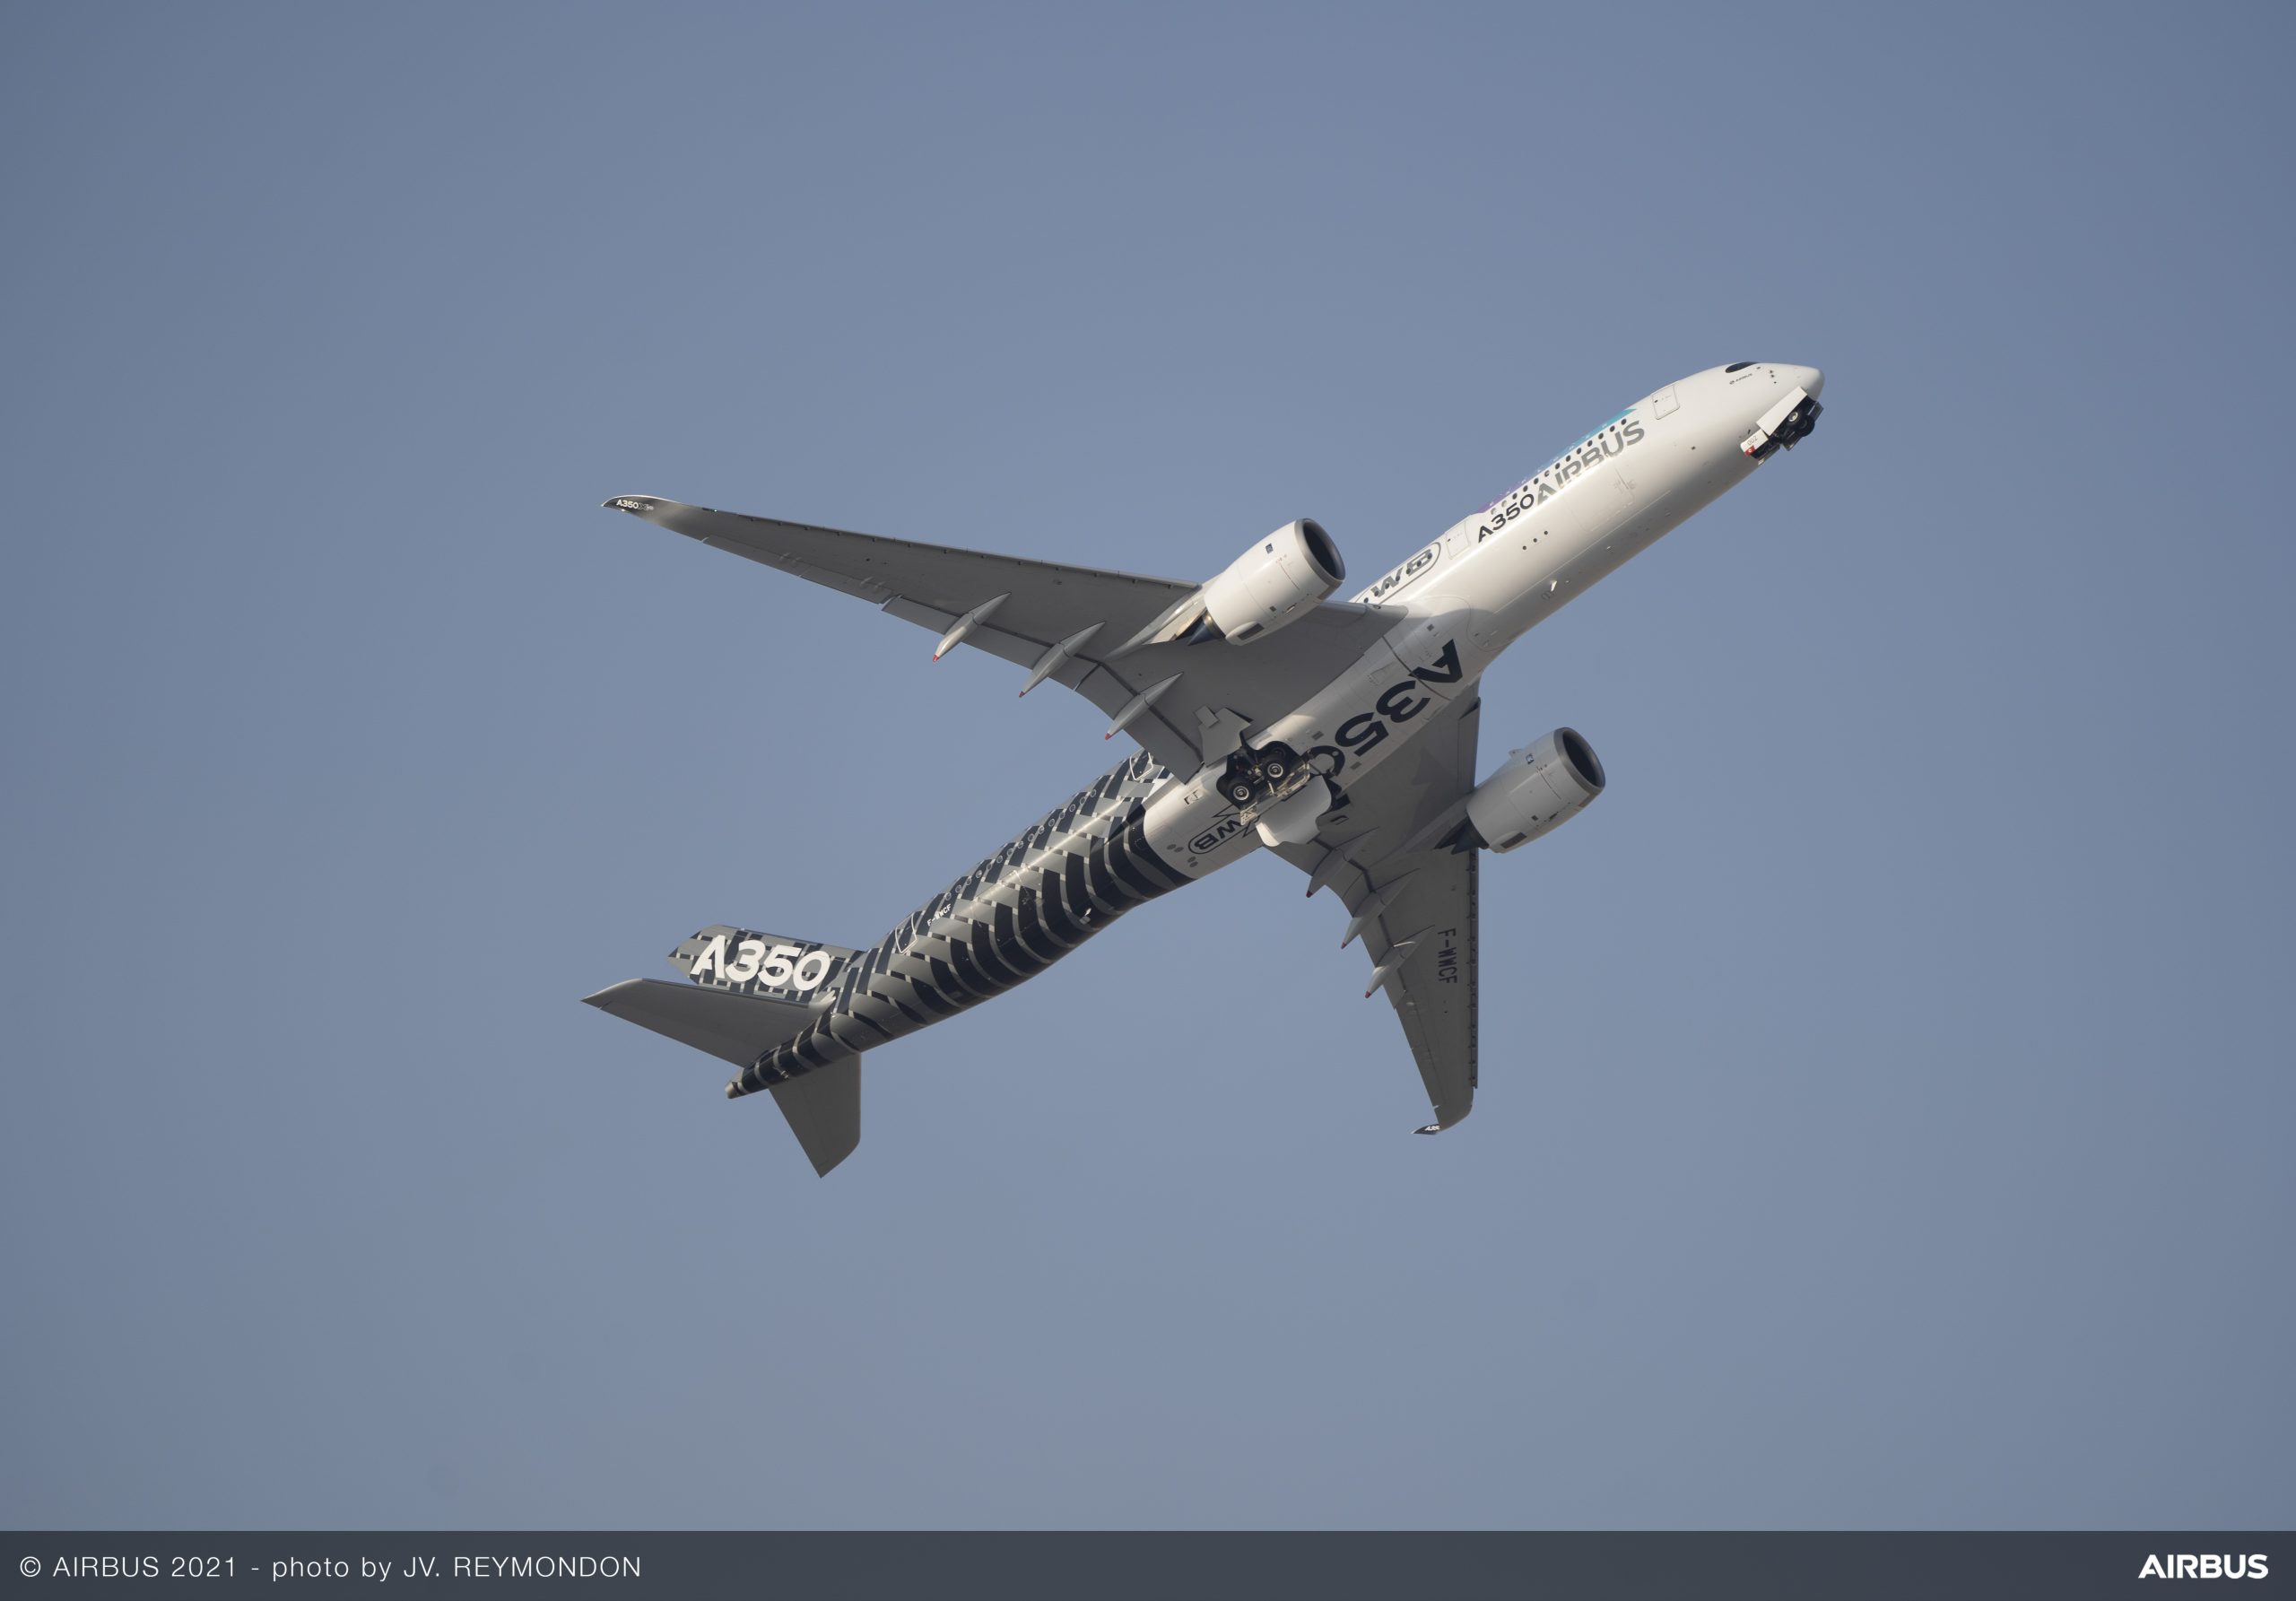 An Airbus A350 in flight